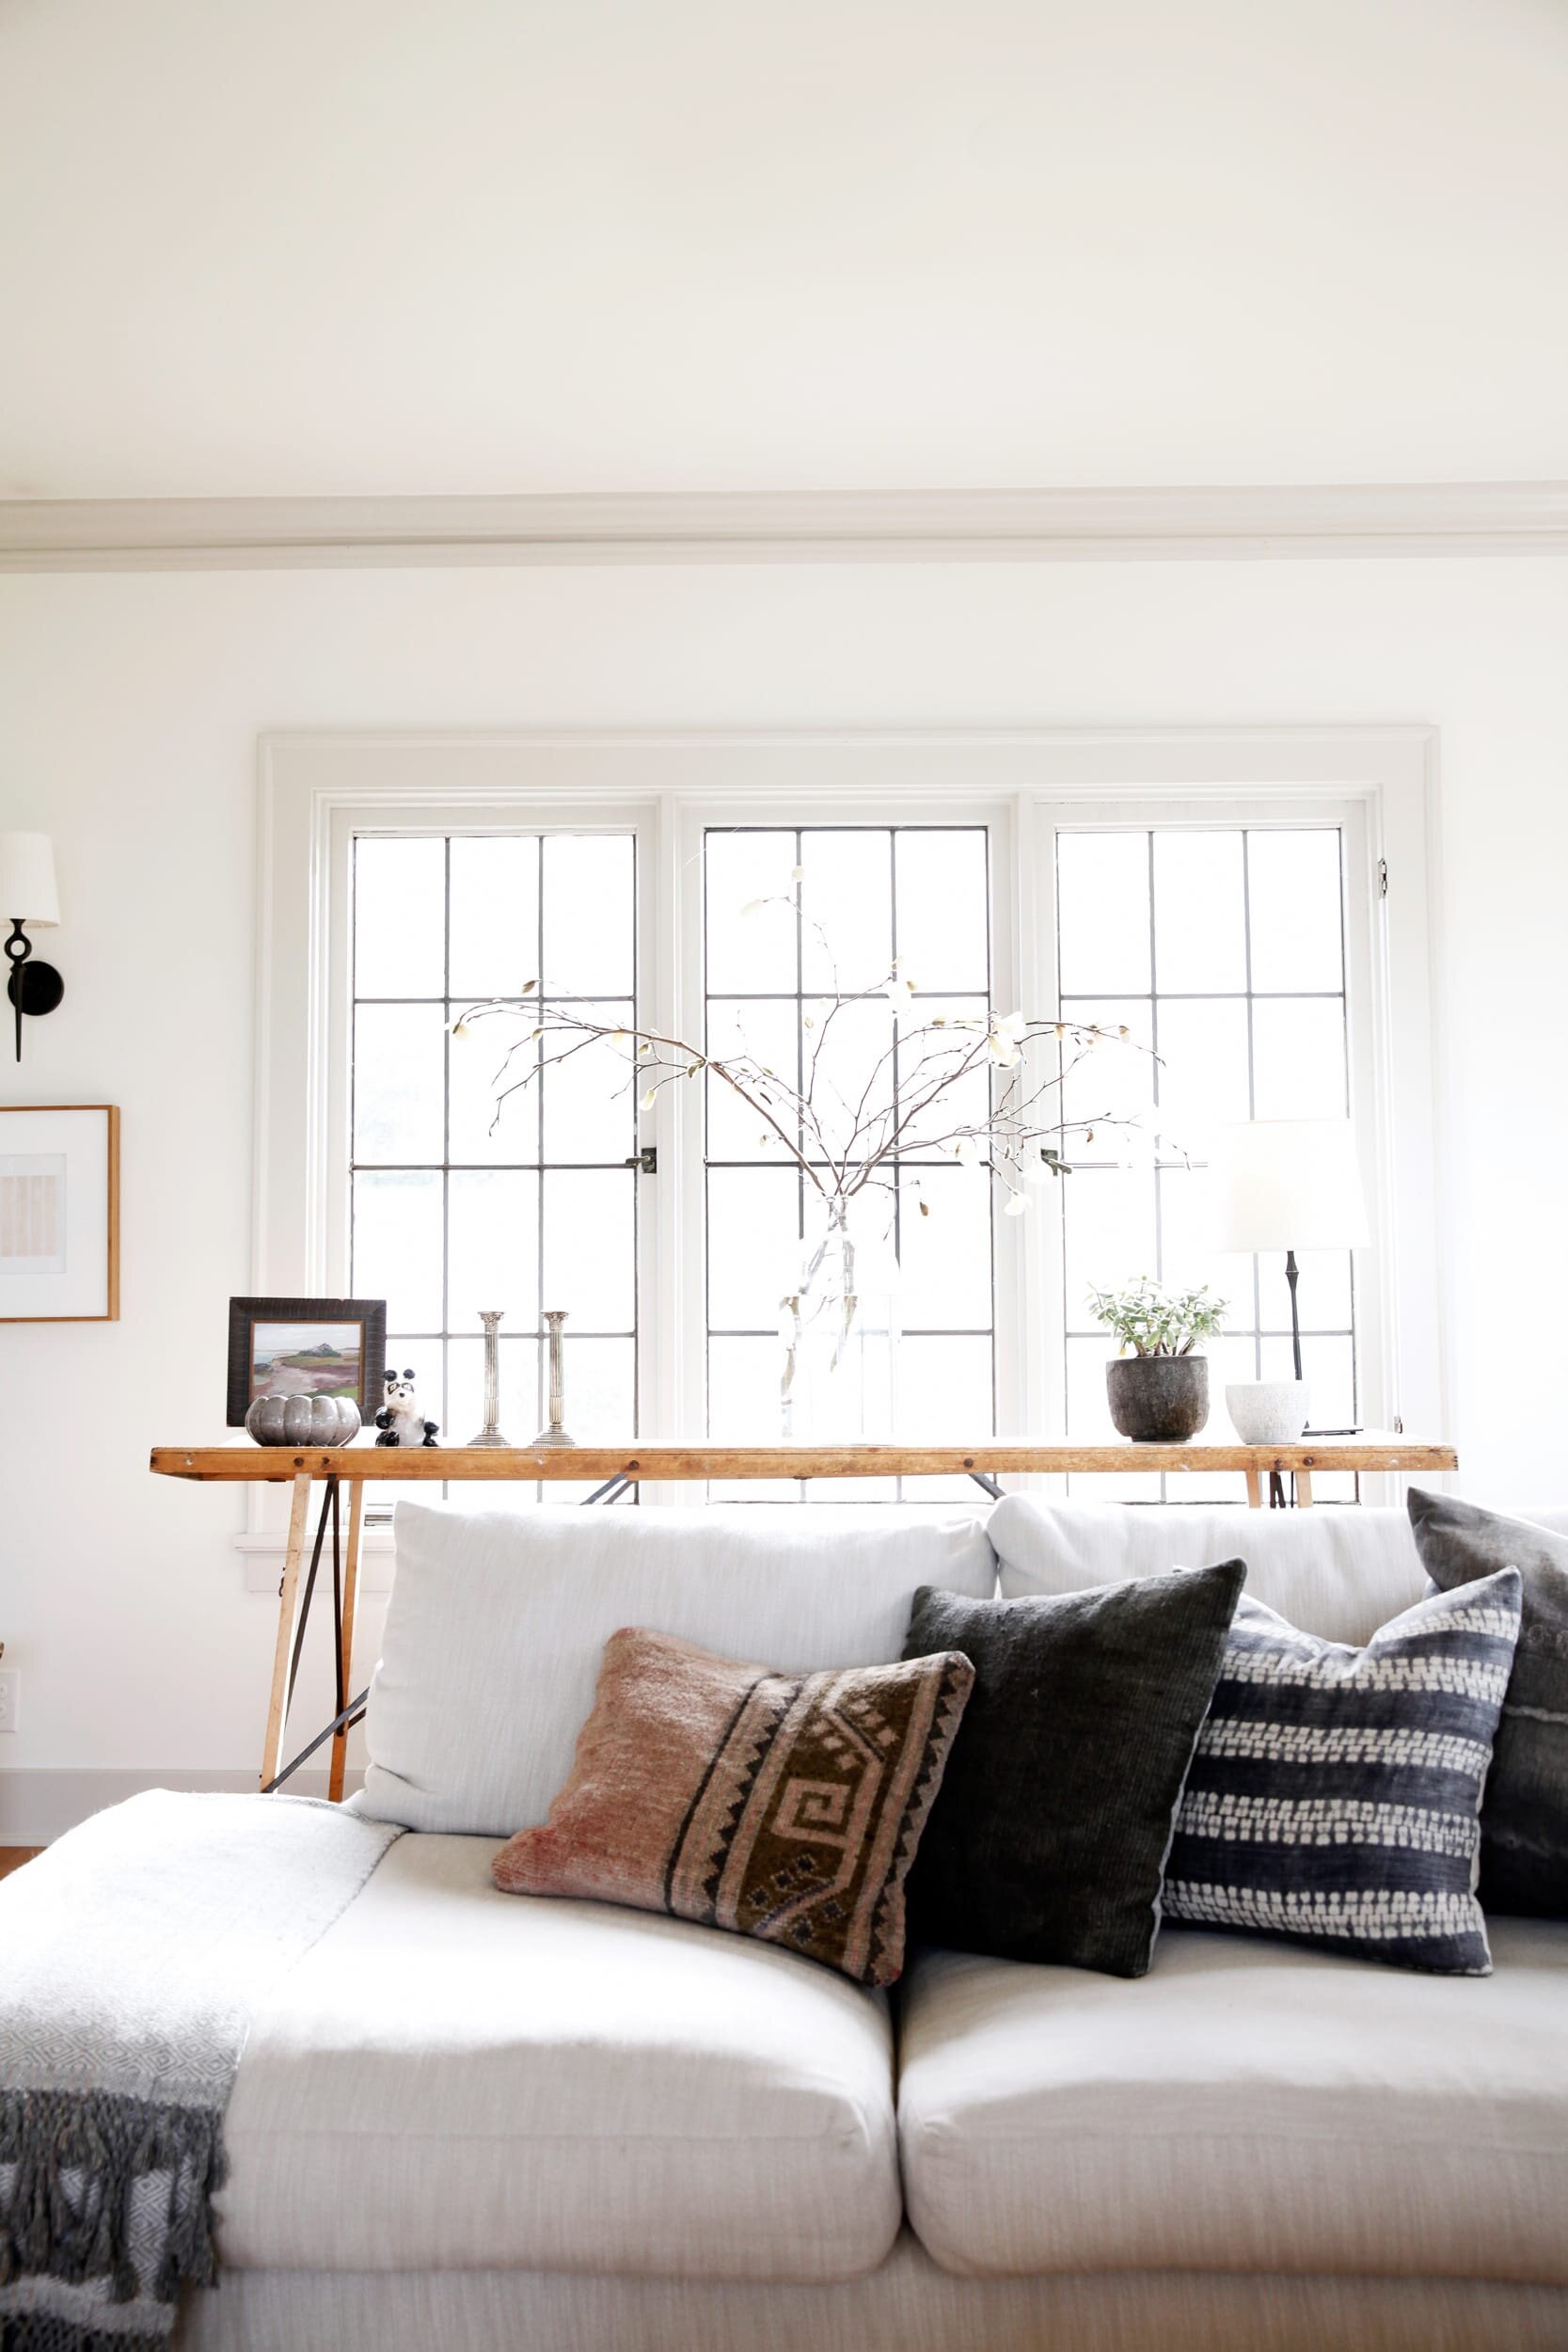 White walls with putty gray trim